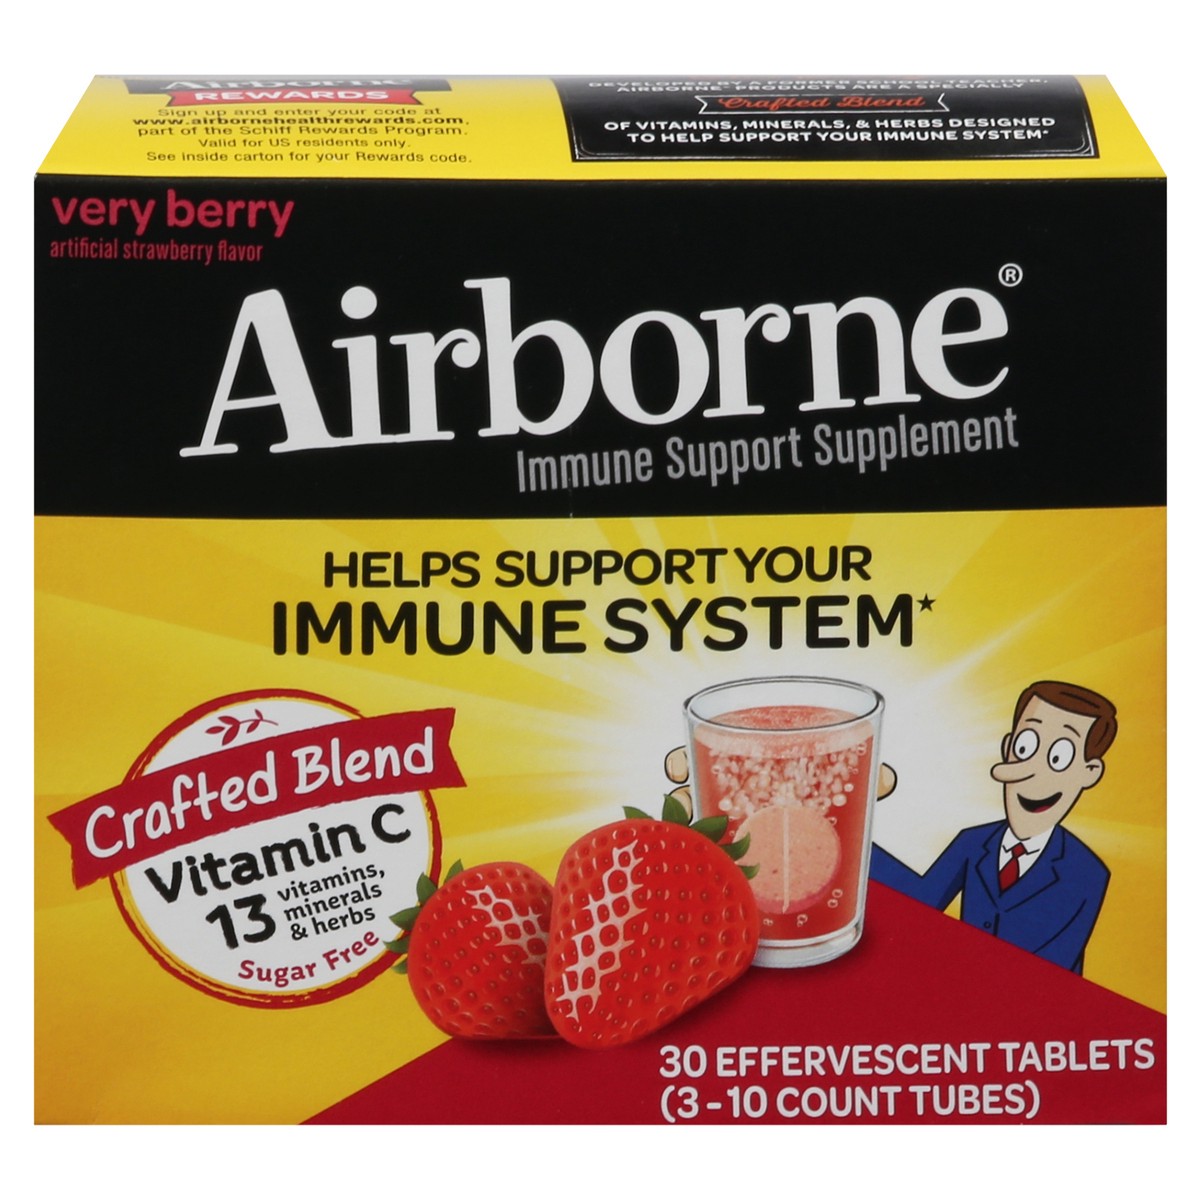 slide 2 of 14, Airborne Very Berry Effervescent Tablets, 30 count - 1000mg of Vitamin C, Immune Support Supplement, 30 ct